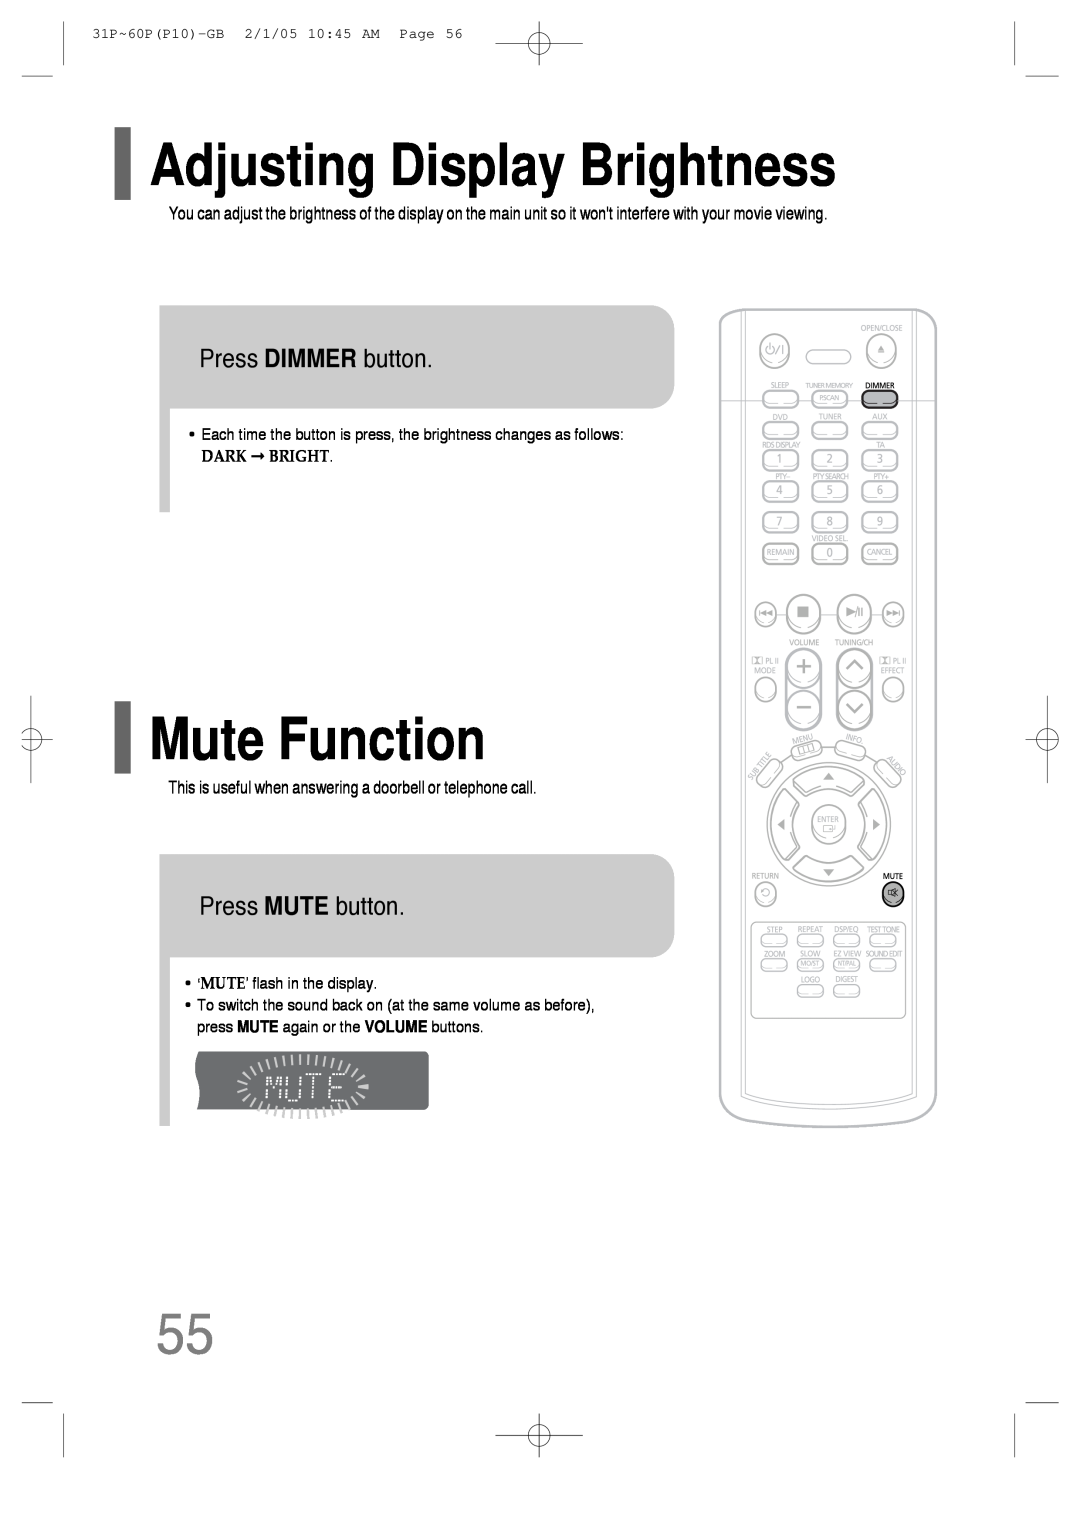 Samsung P10 instruction manual Adjusting Display Brightness, Mute Function, Press DIMMER button, Press MUTE button 